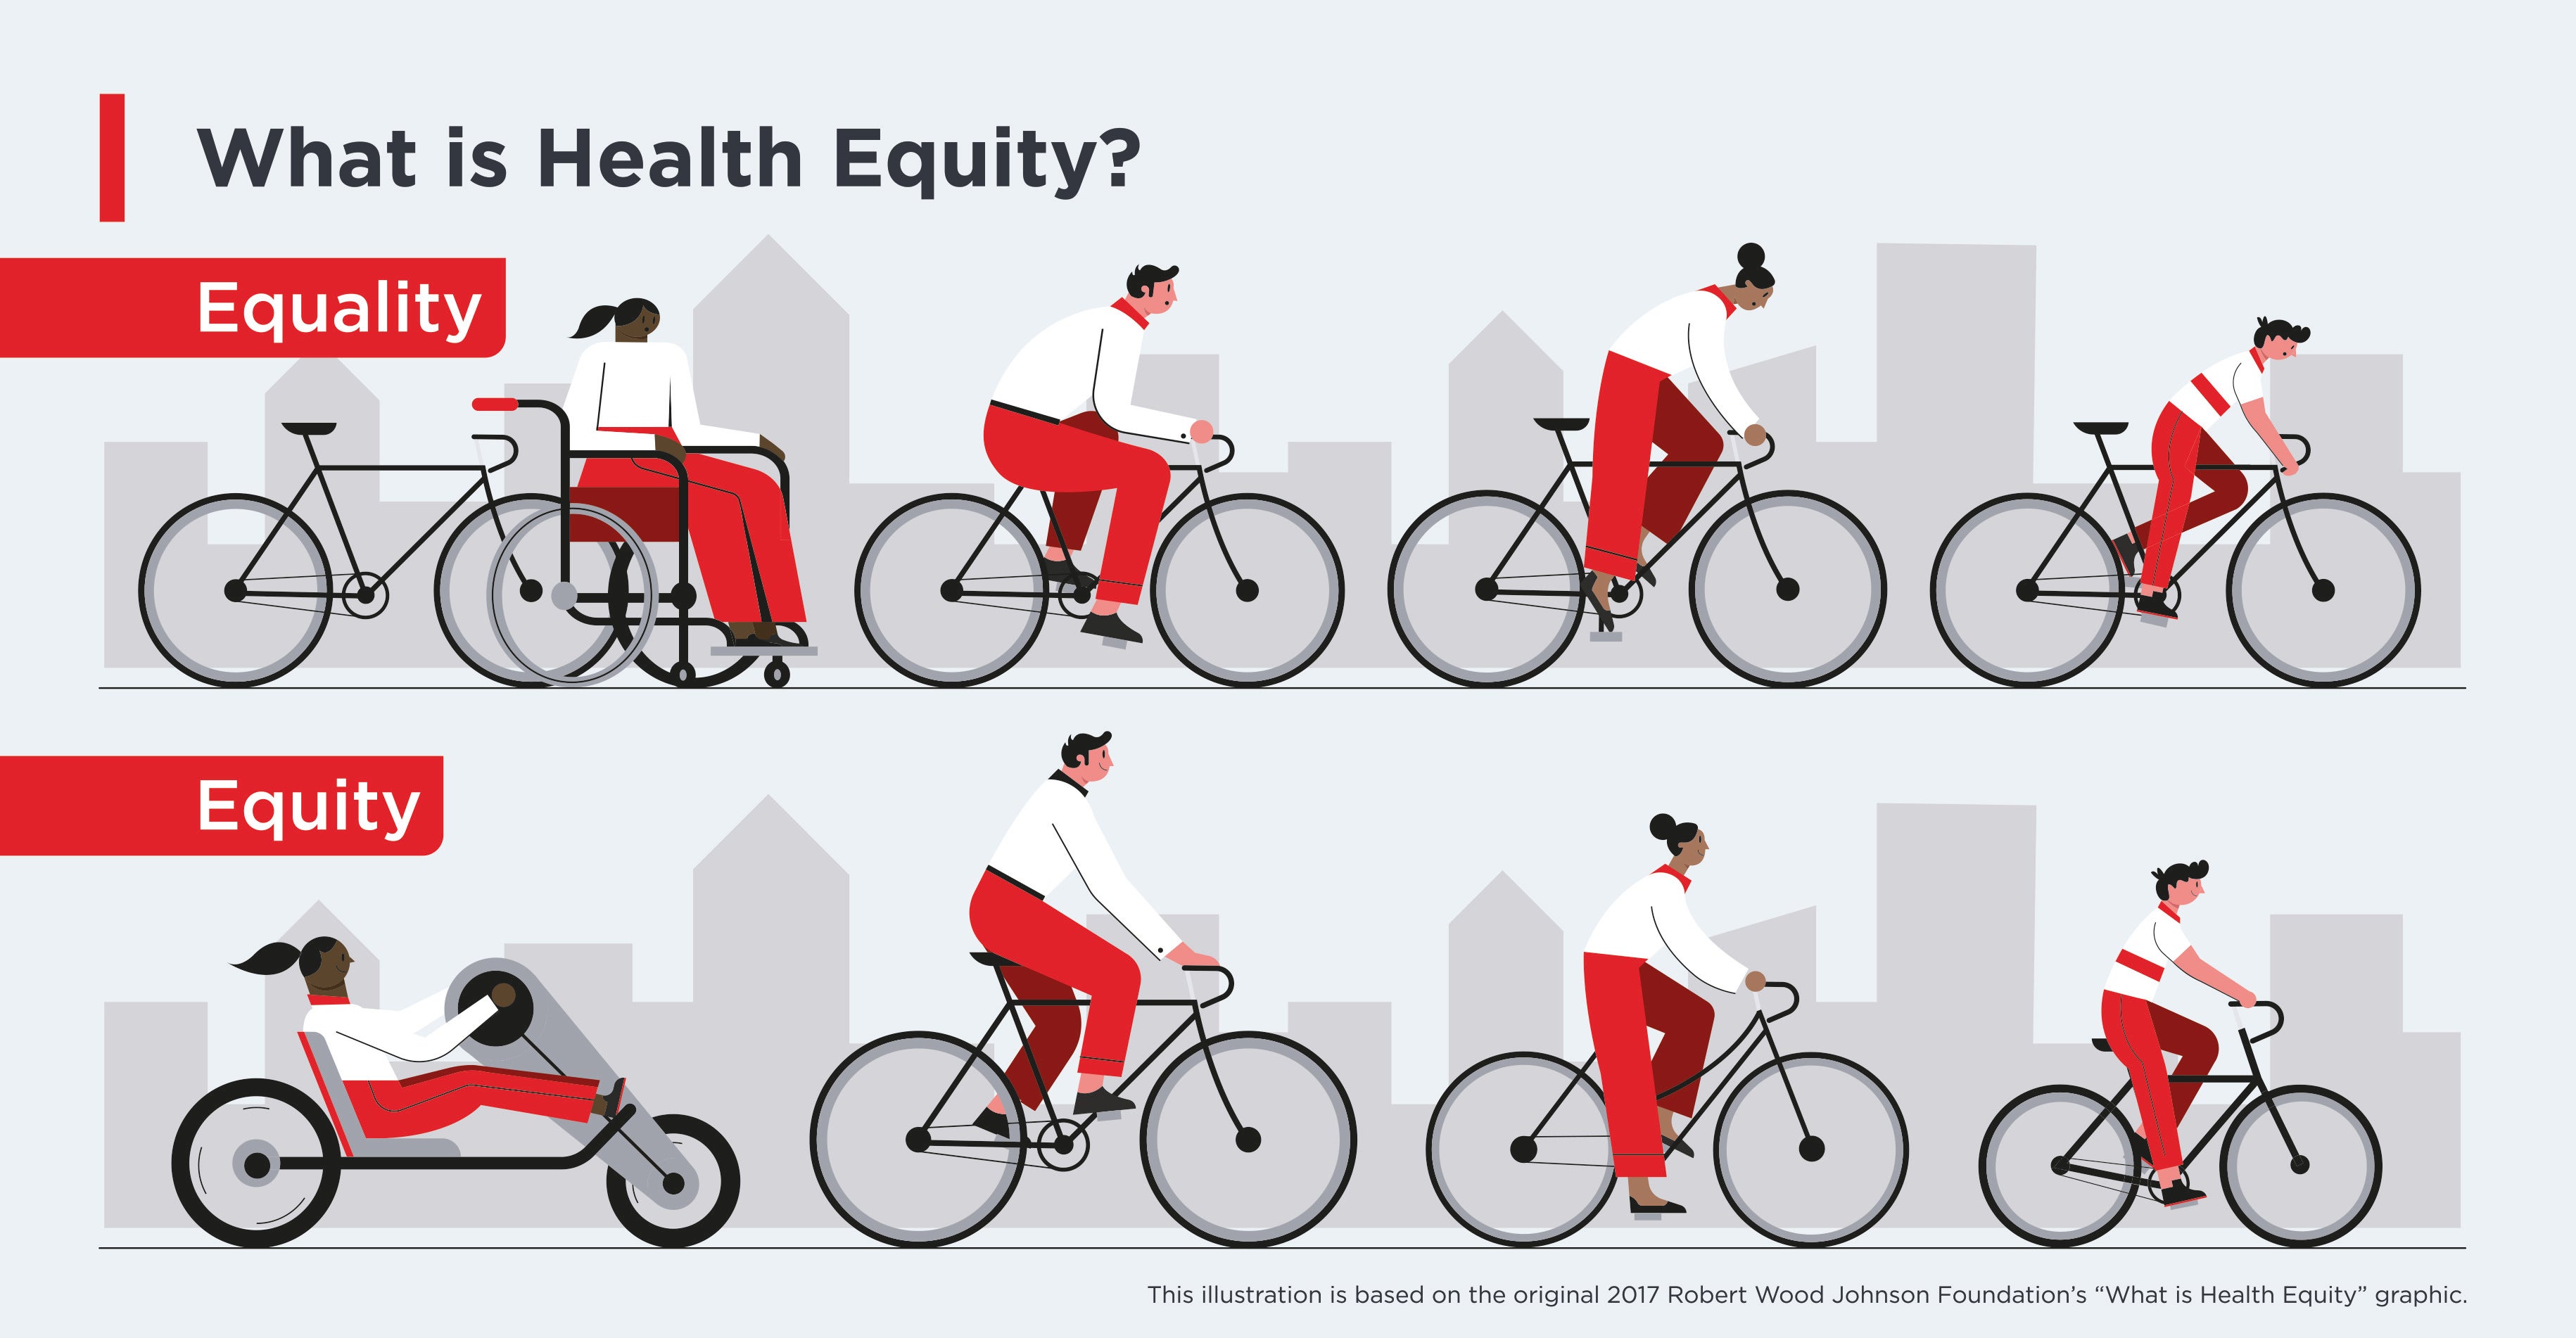 What is health equity?